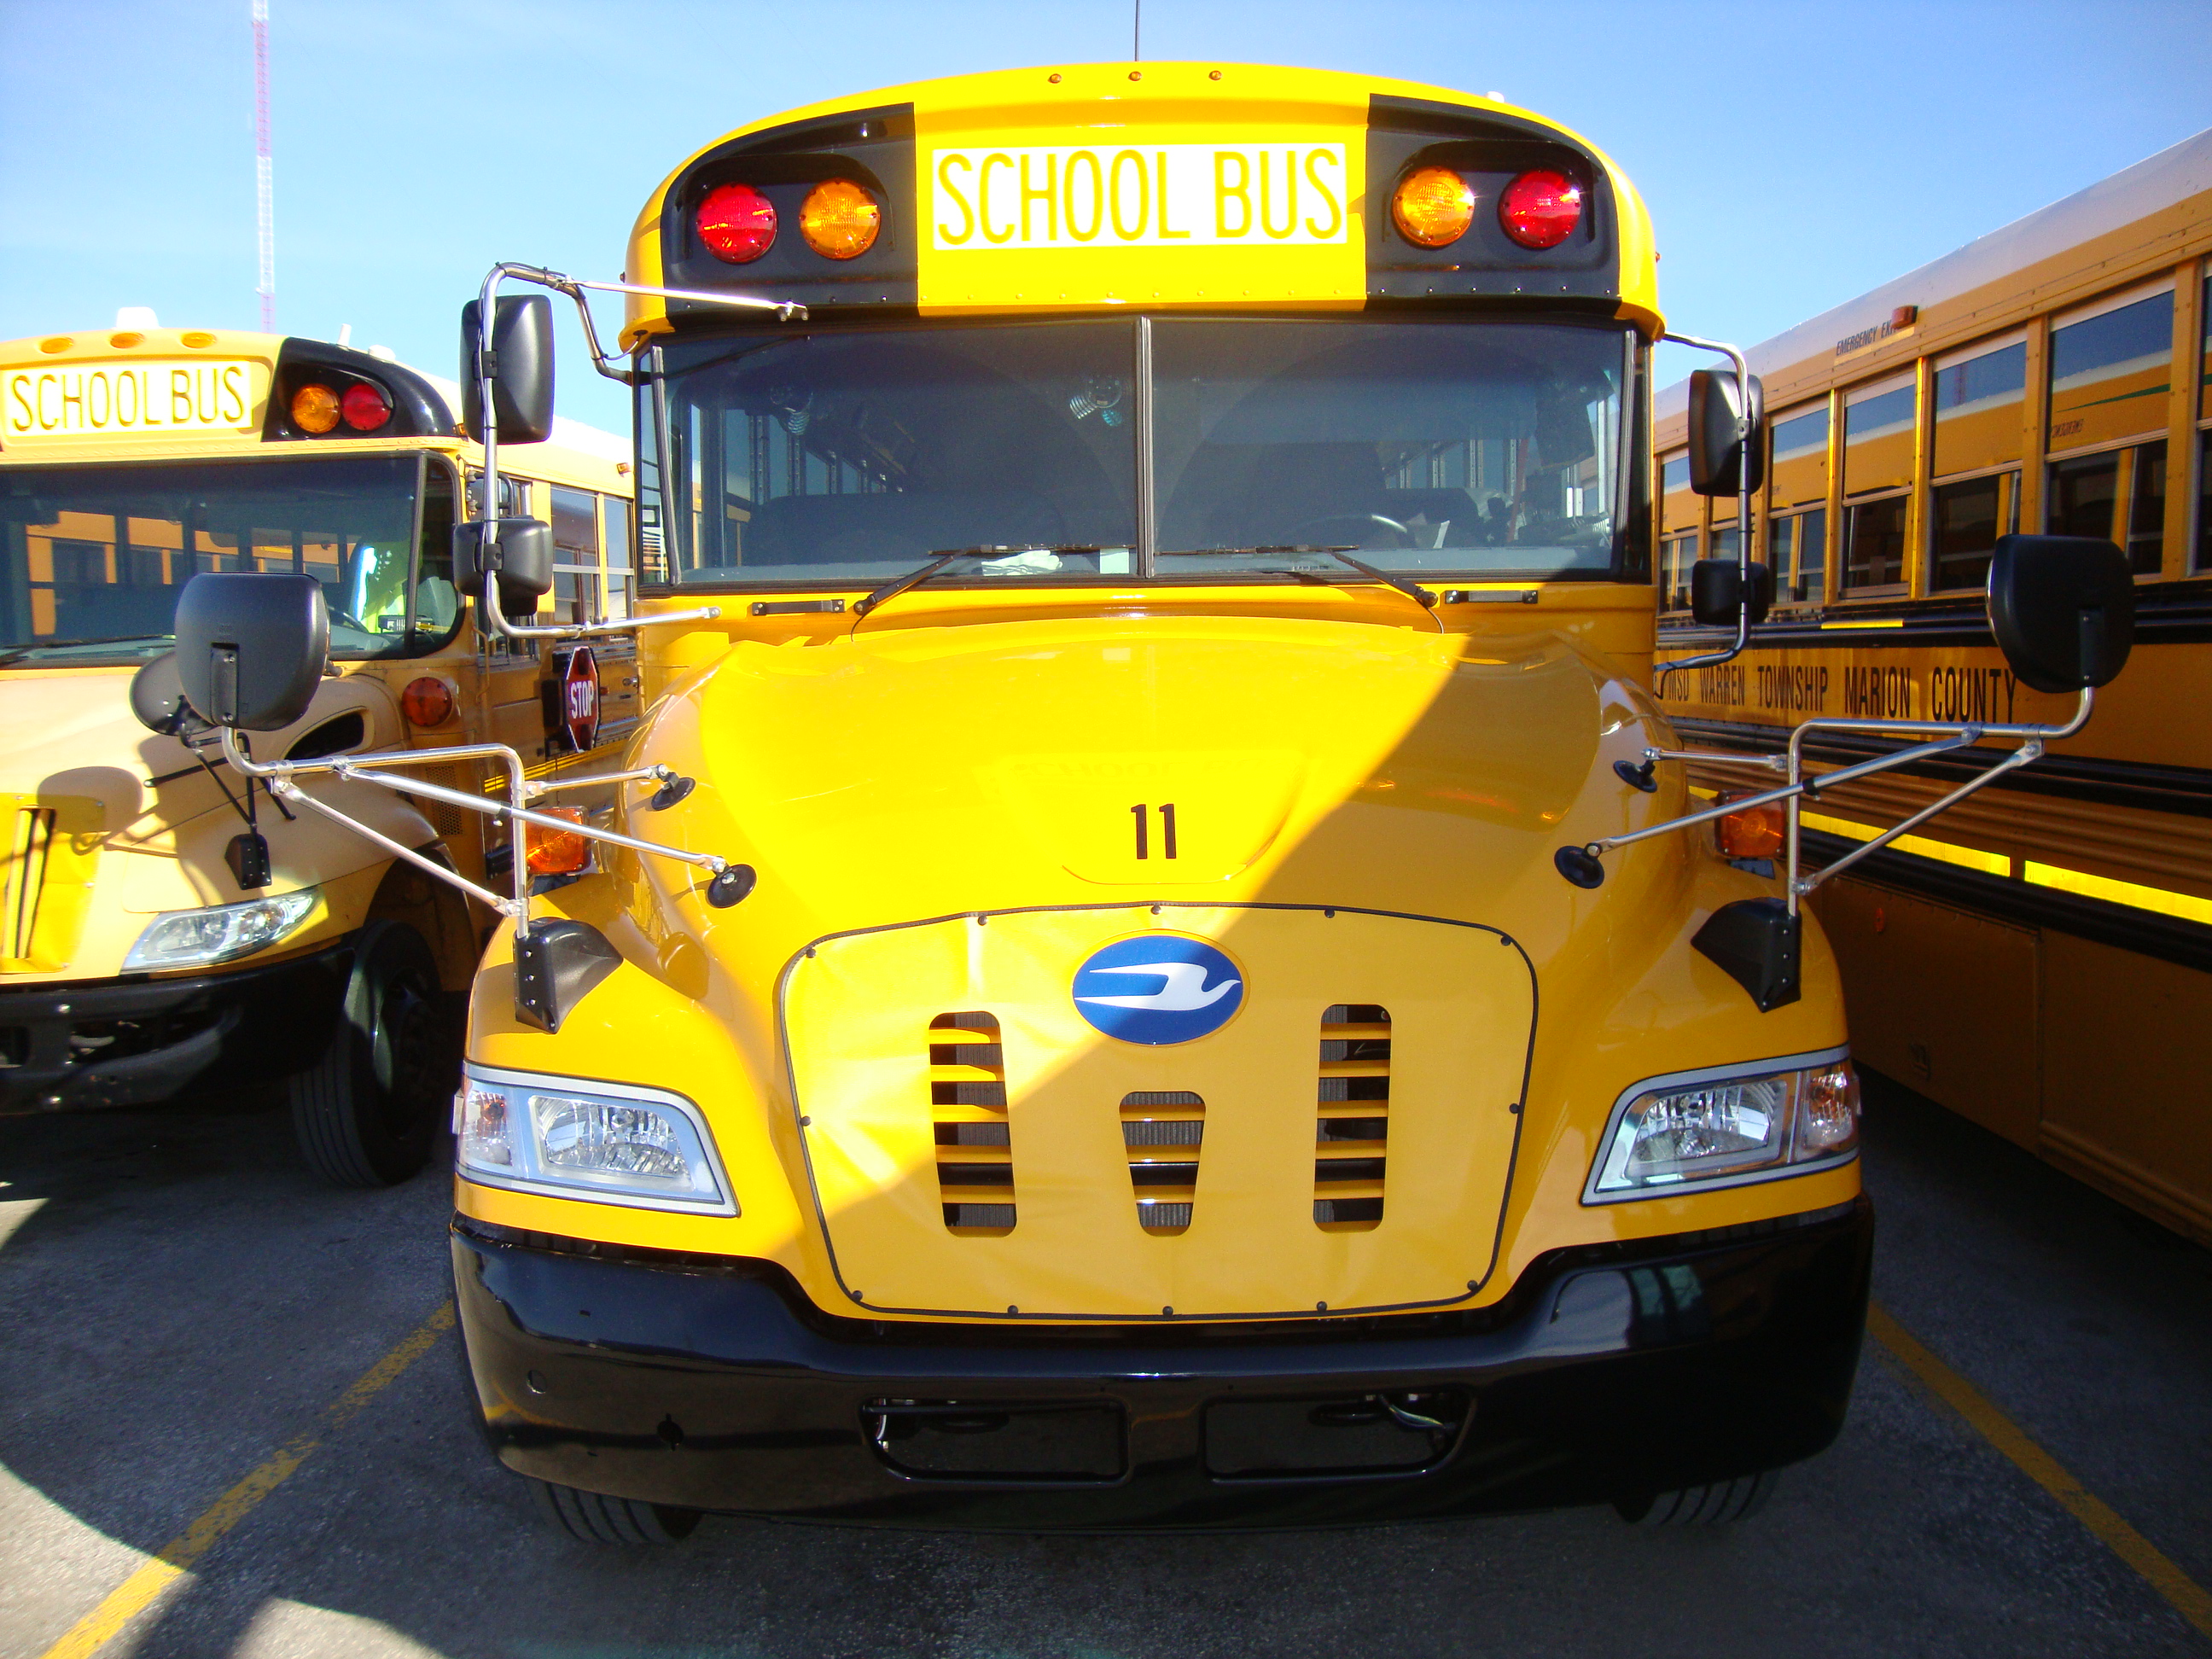 The fleet of propane autogas school buses will reduce nitrogen oxide emissions by over 13,600 pounds and particulate matter by about 350 pounds each year compared with the diesel buses they replaced.